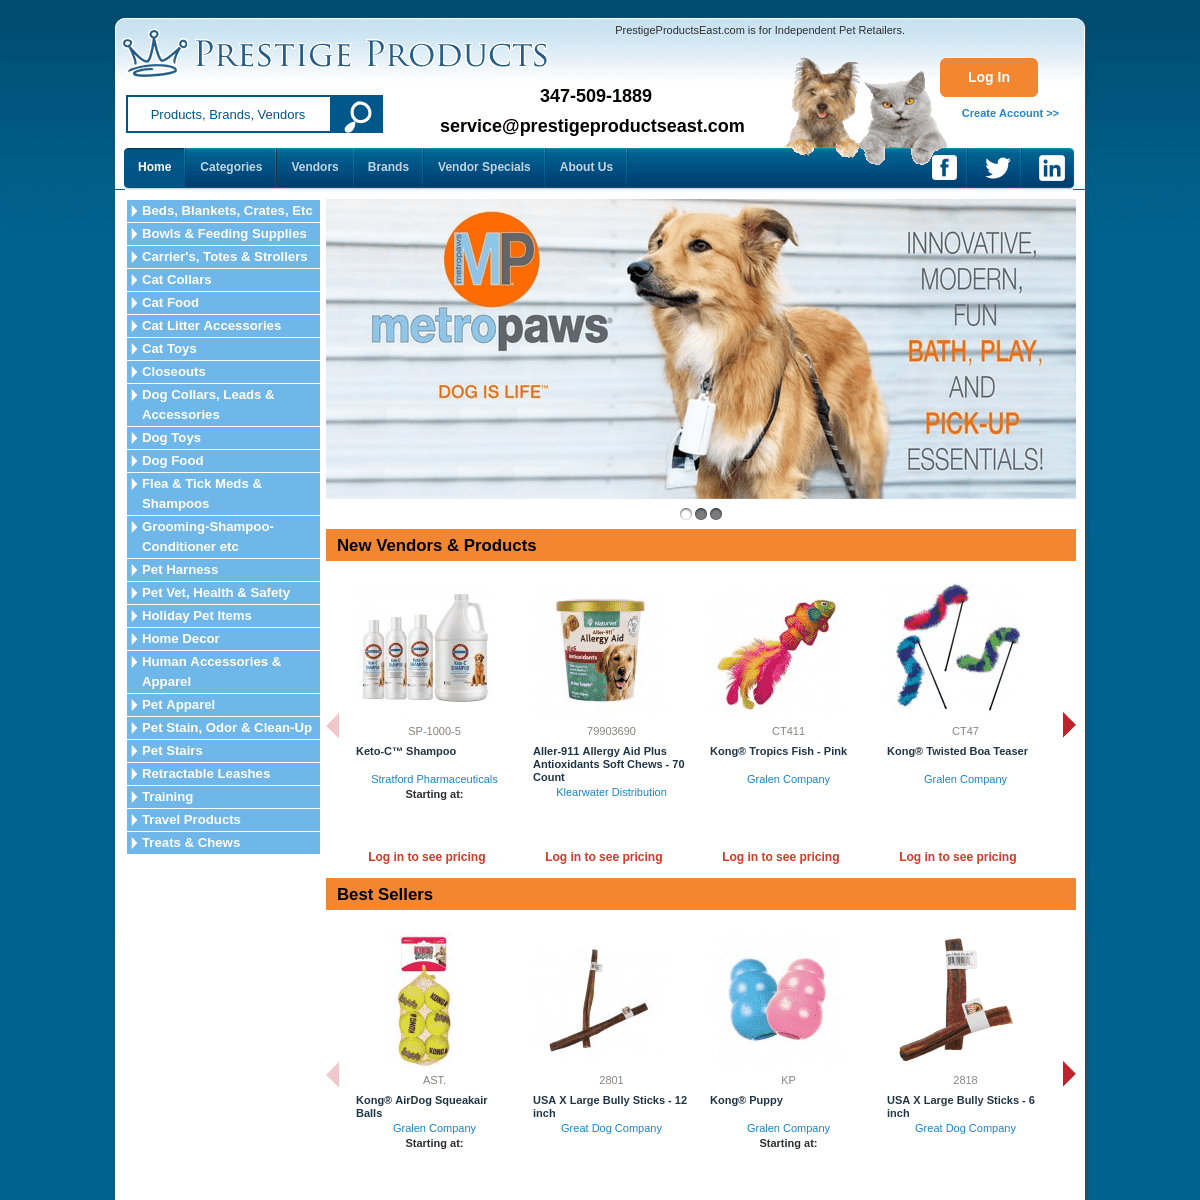 PrestigeProductsEast.com is where pet product retailers shop for their stores.